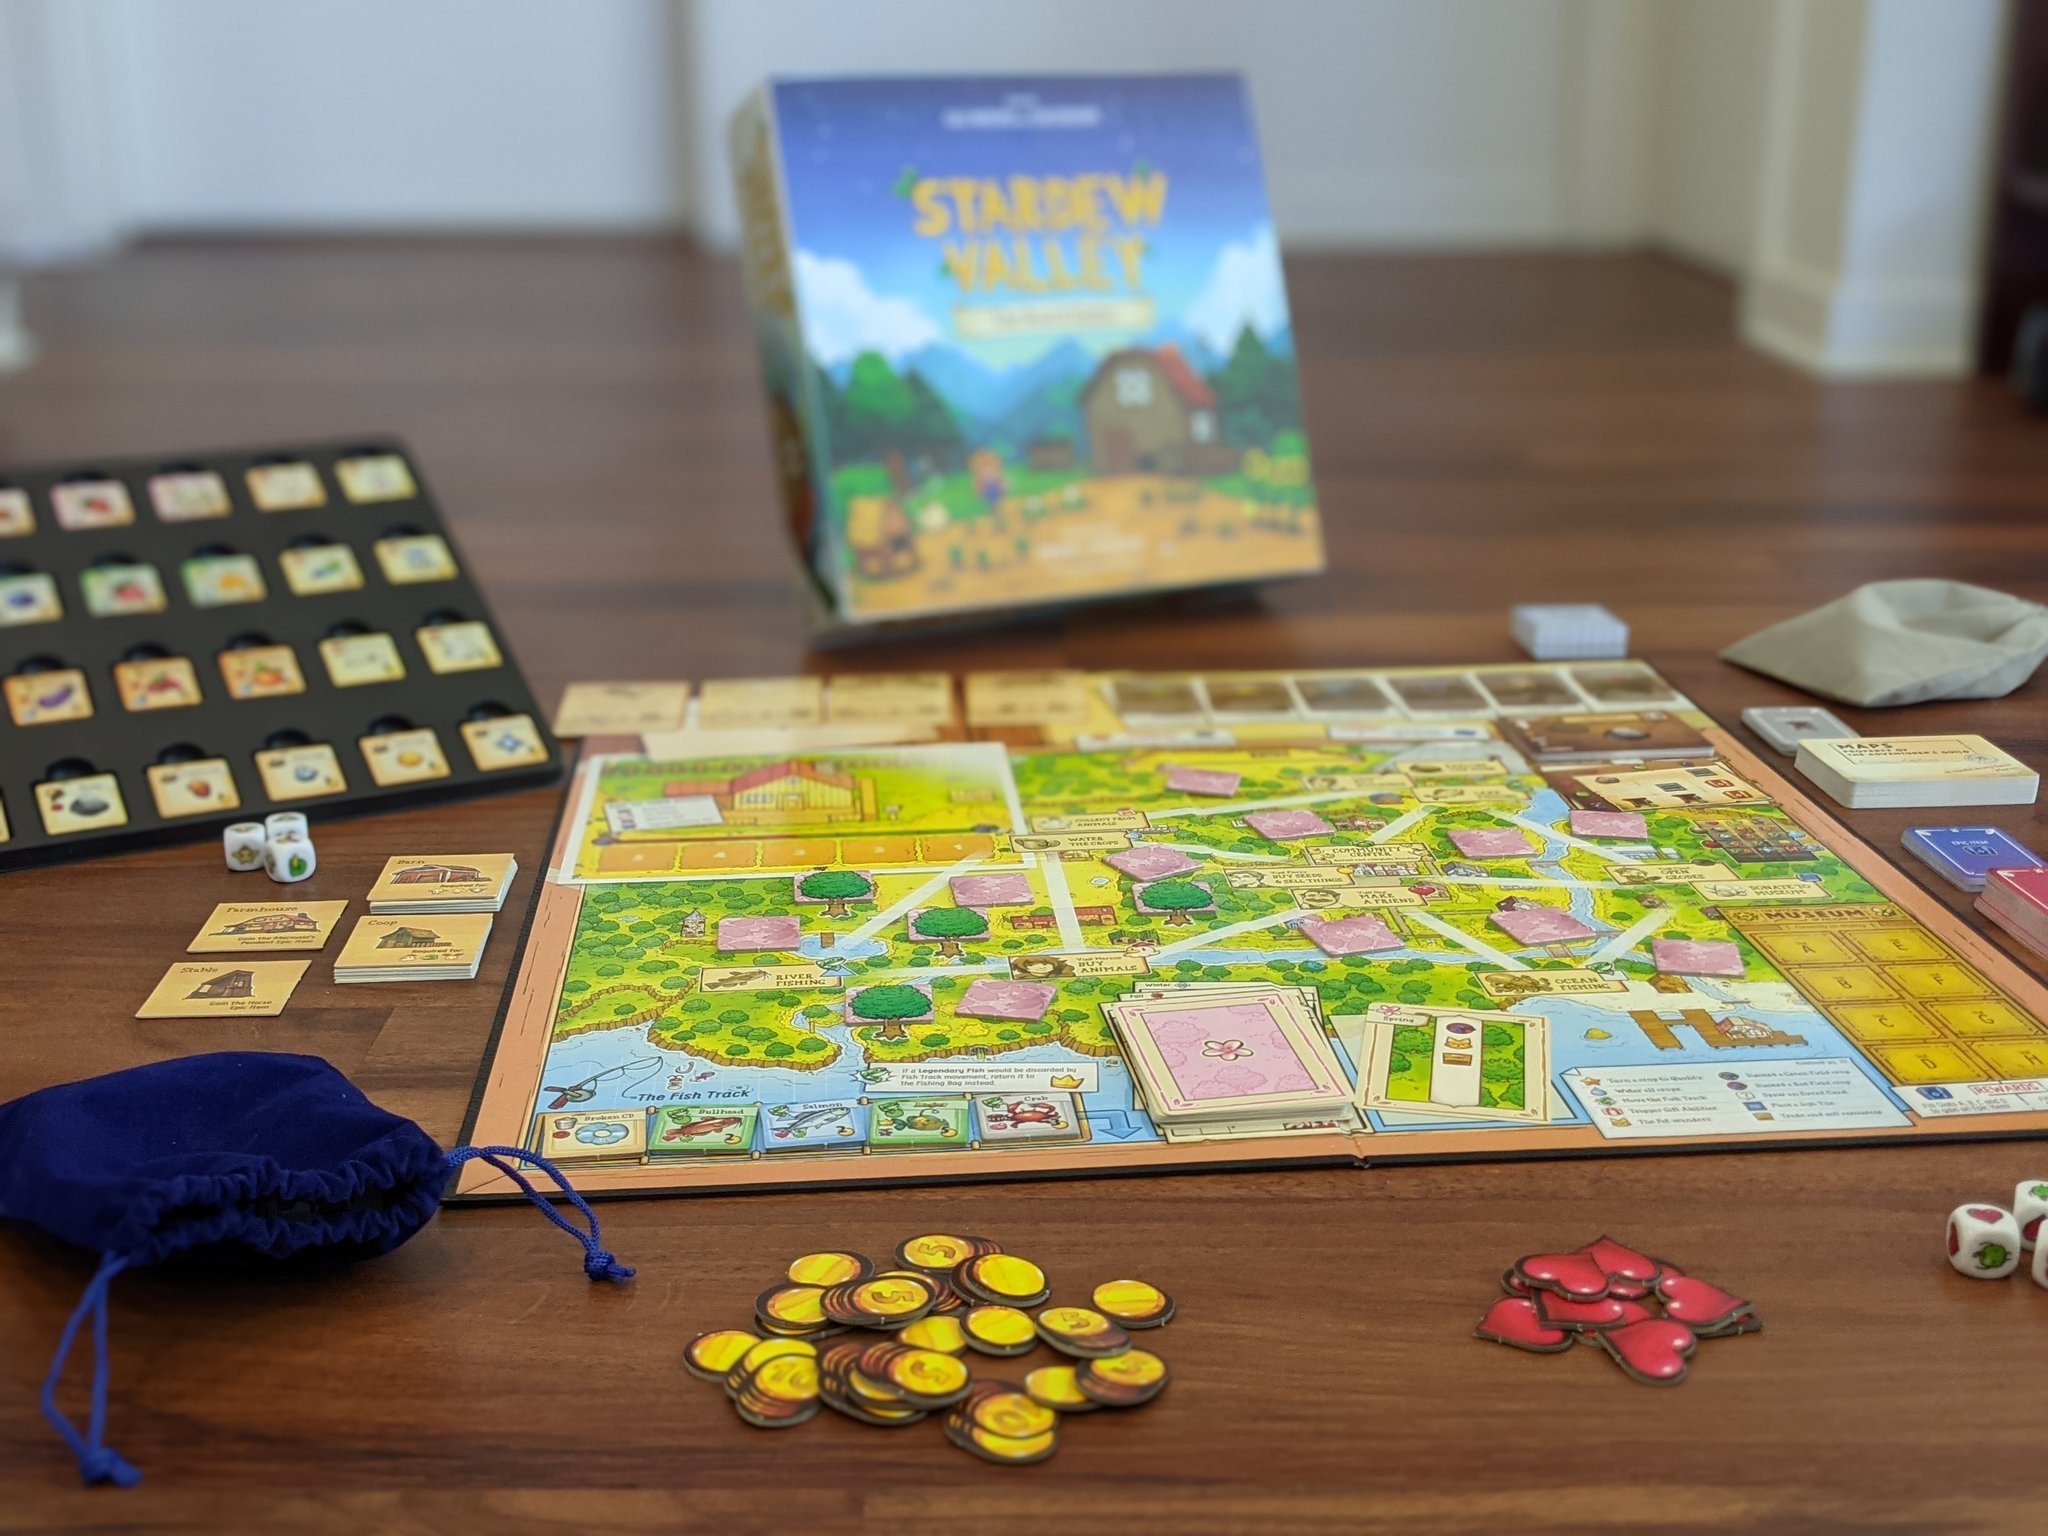 Stardew Valley がボードゲームに Stardew Valley The Board Game 発表 現在はアメリカのみ購入可能 Game Spark 国内 海外ゲーム情報サイト